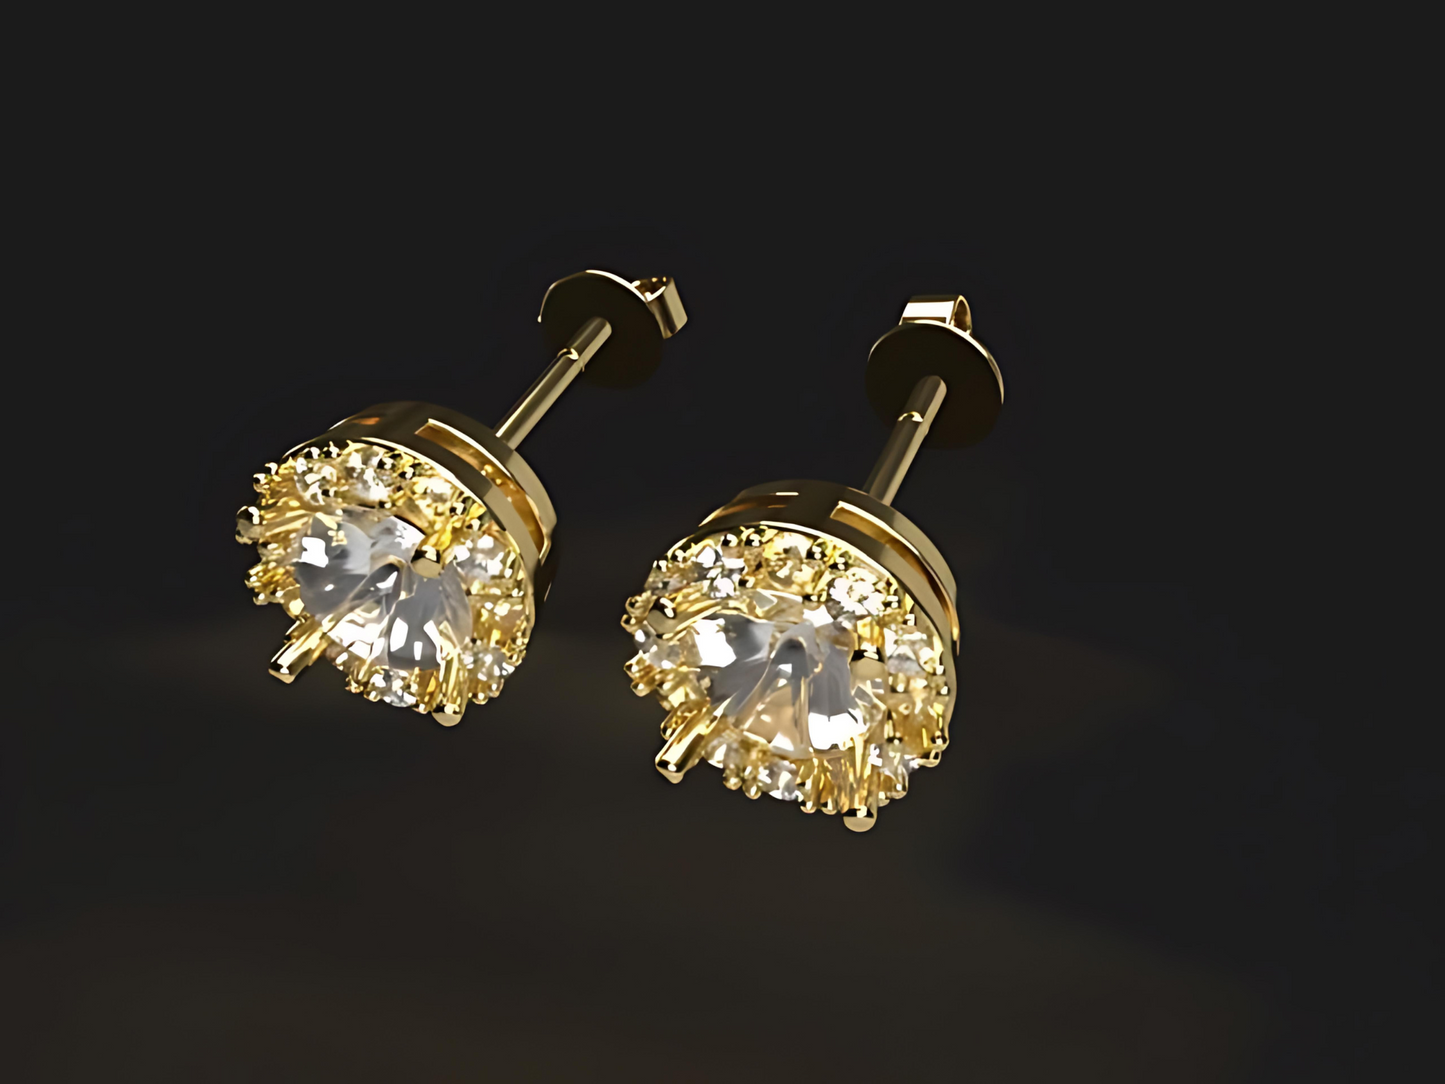 Handmade gold earrings with natural 1.48 ct. Vs high quality Diamonds, halo style.